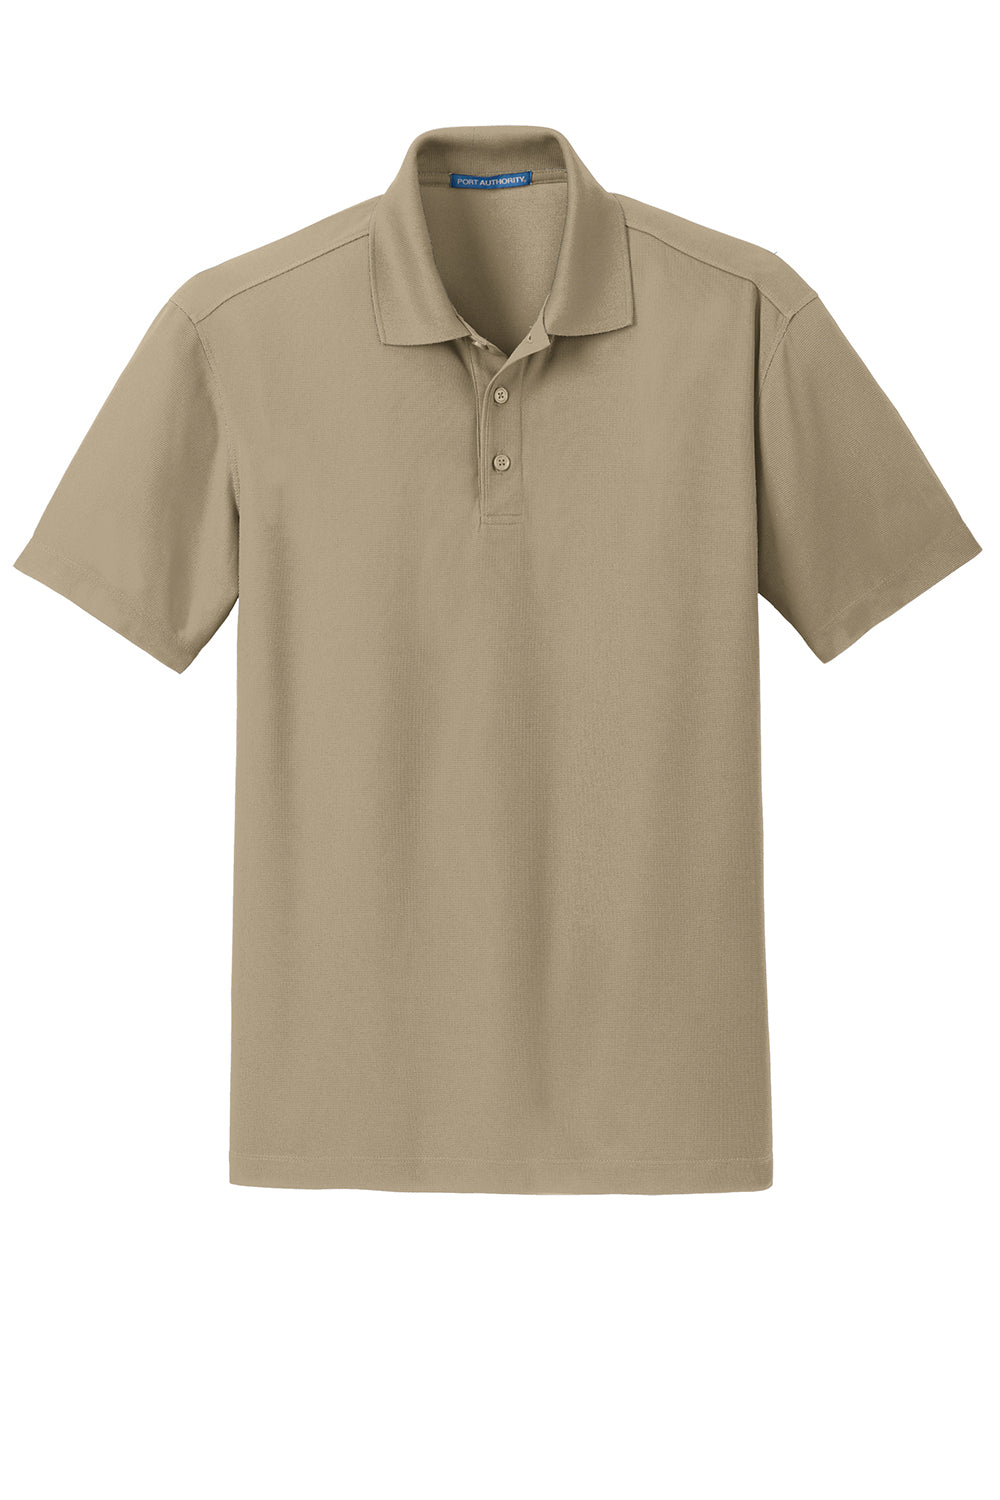 Port Authority K572 Mens Dry Zone Moisture Wicking Short Sleeve Polo Shirt Tan Flat Front